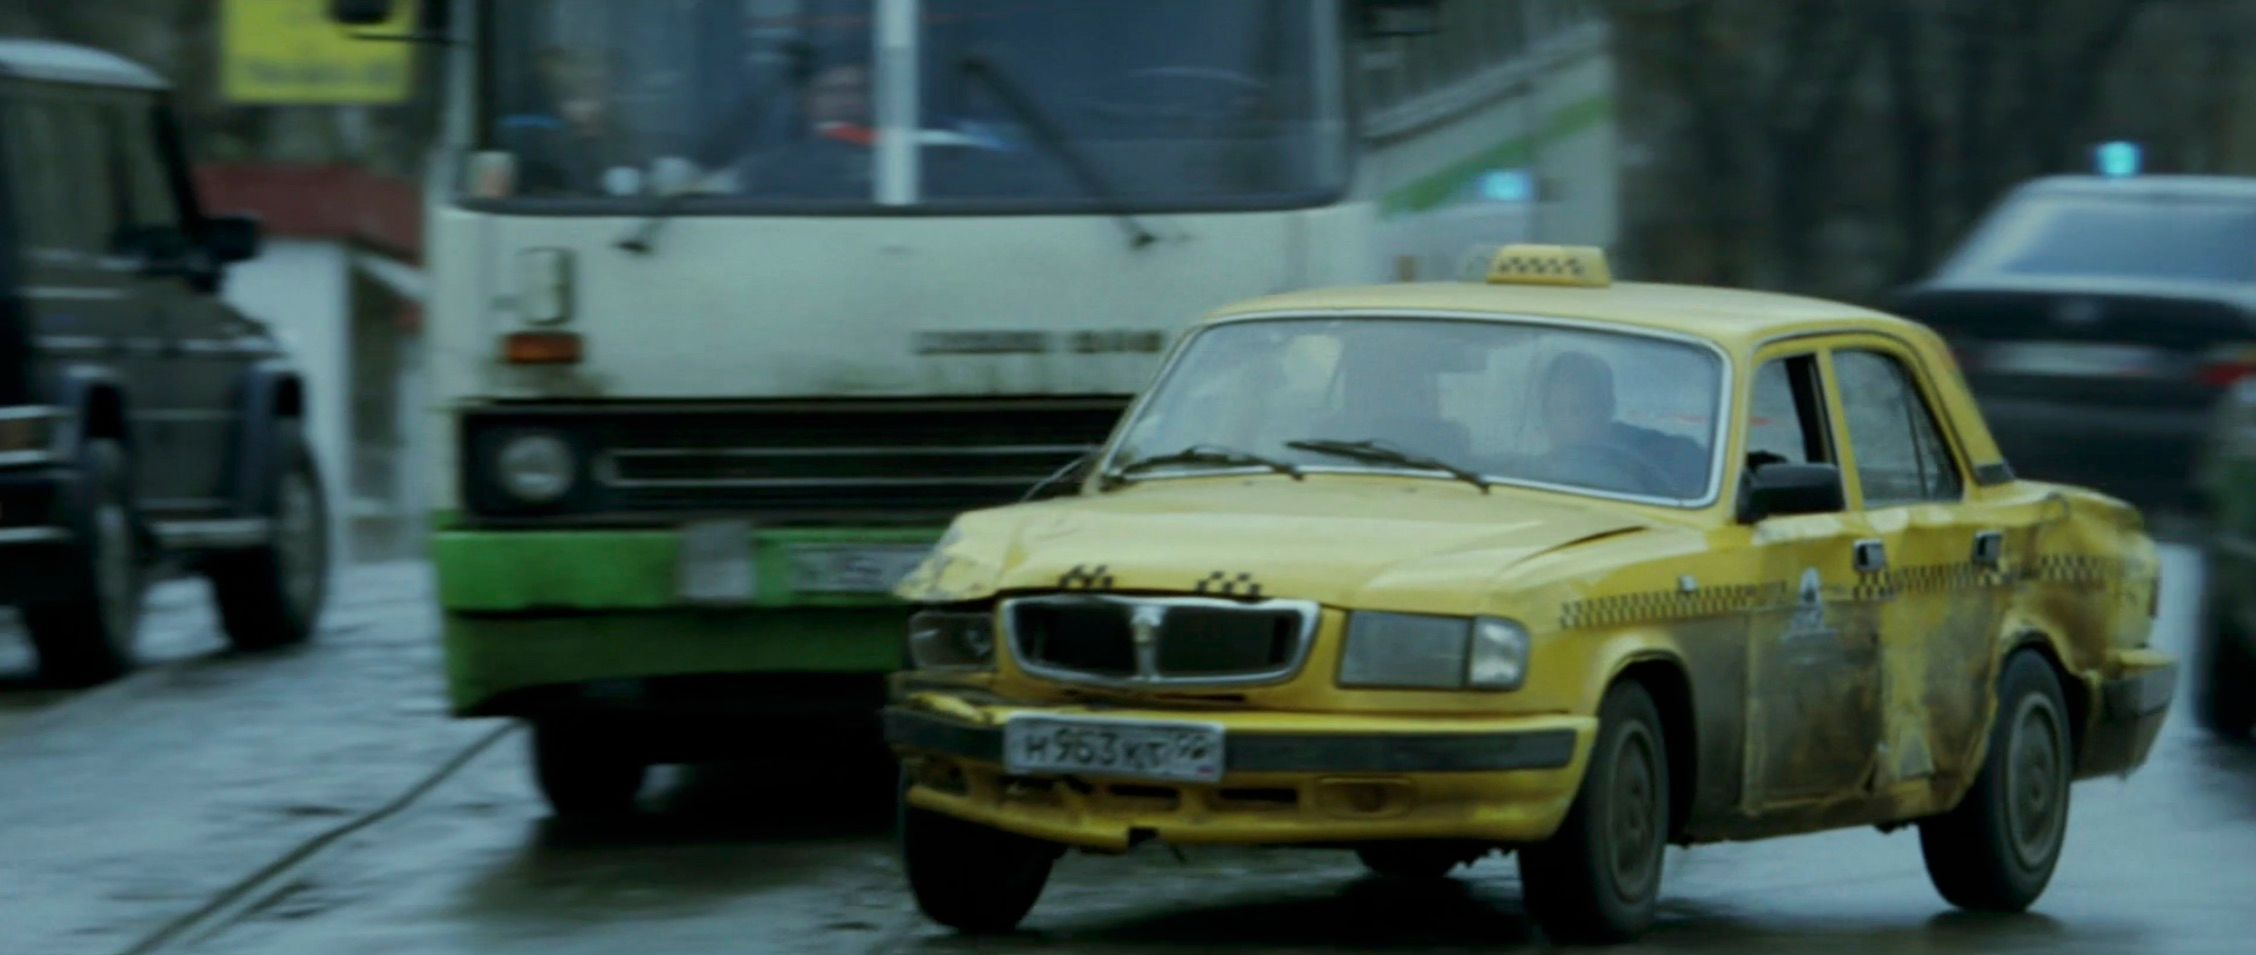 The Bourne Supremacy 2004 car chase film